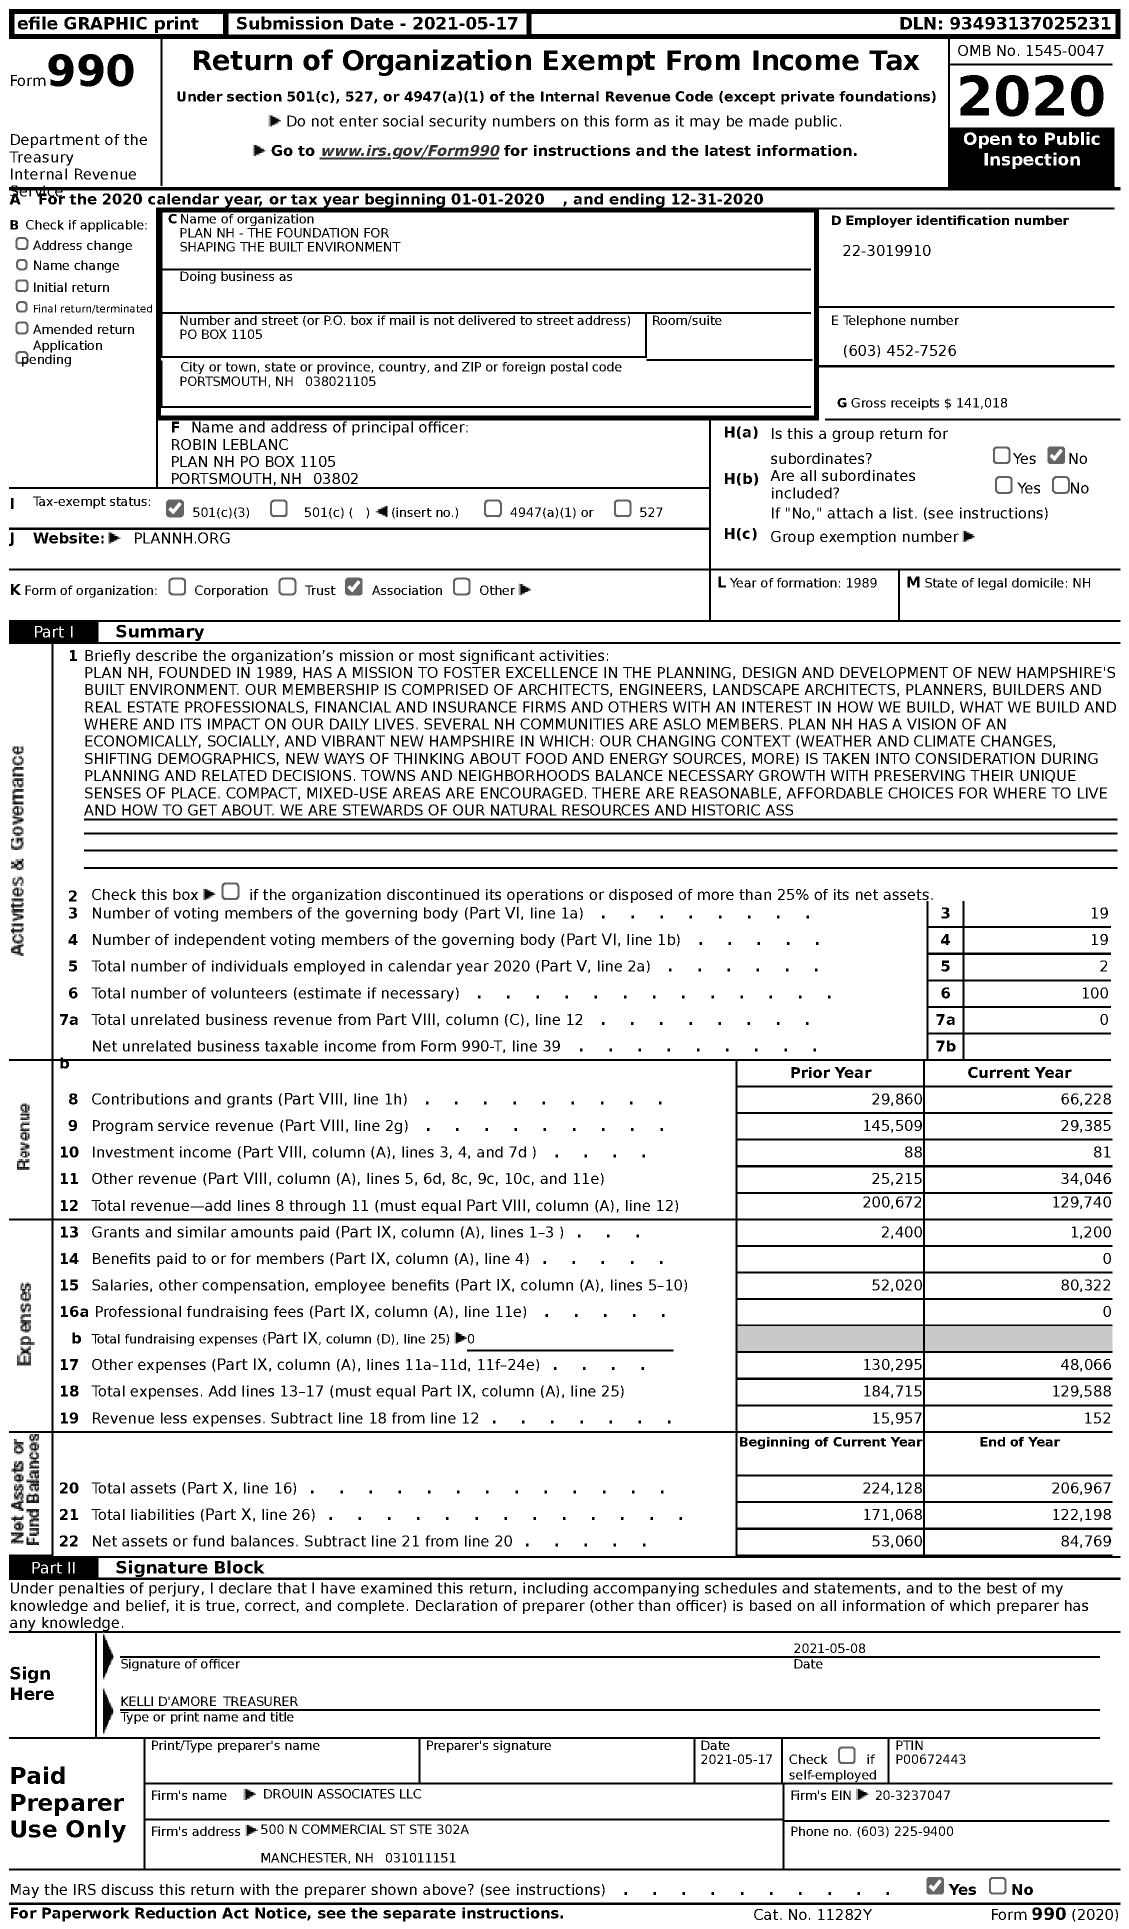 Image of first page of 2020 Form 990 for Plan NH - The Foundation for Shaping the Built Environment